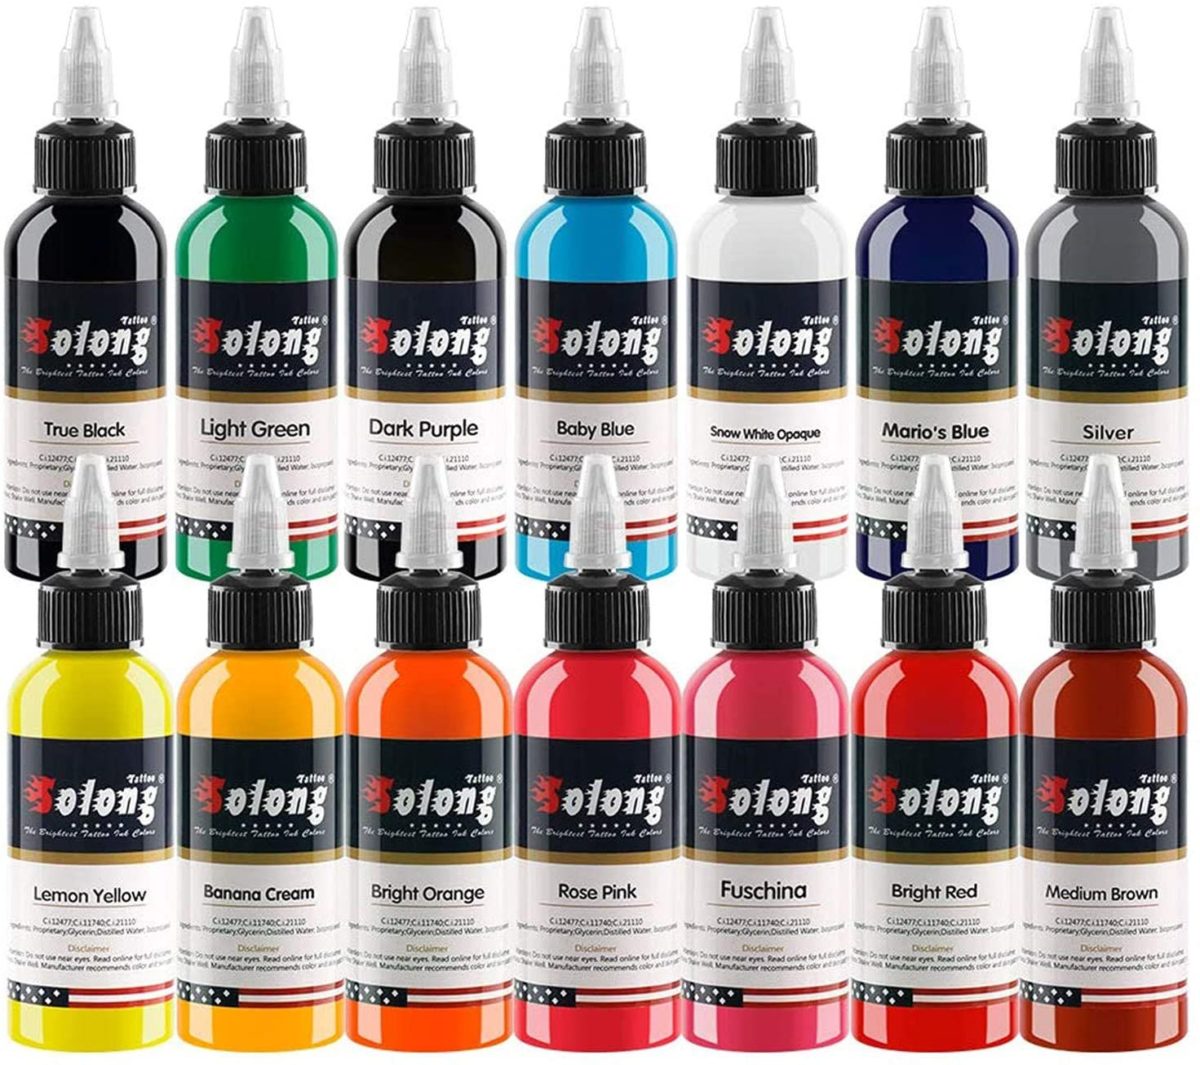 Solong Professional Tattoo Ink Set 14 Complete Colors 1oz (30ml)